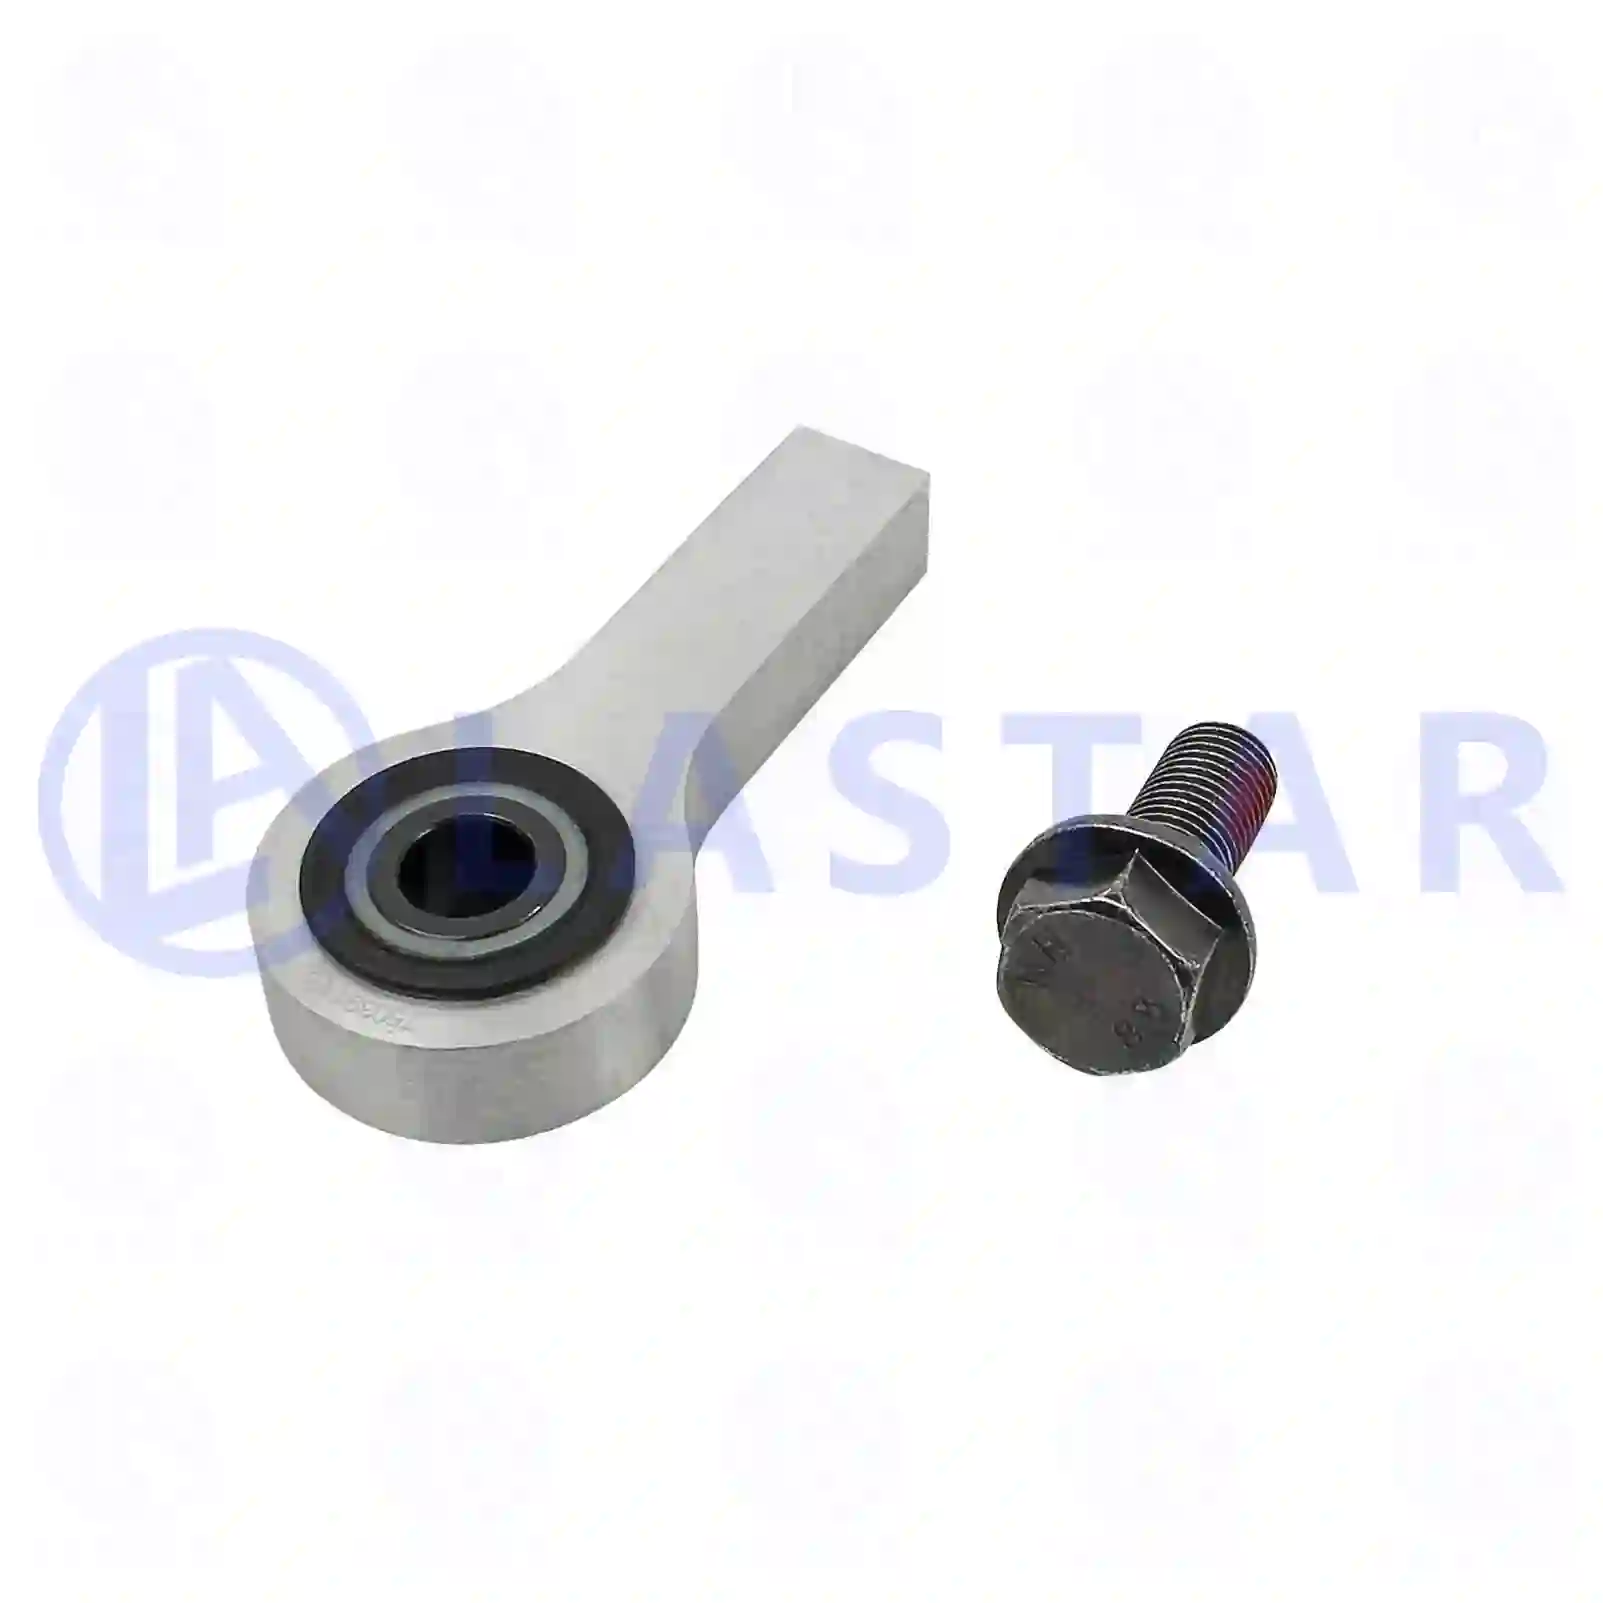 Shock Absorber Bearing joint, complete with seal rings, la no: 77736103 ,  oem no:2171715 Lastar Spare Part | Truck Spare Parts, Auotomotive Spare Parts